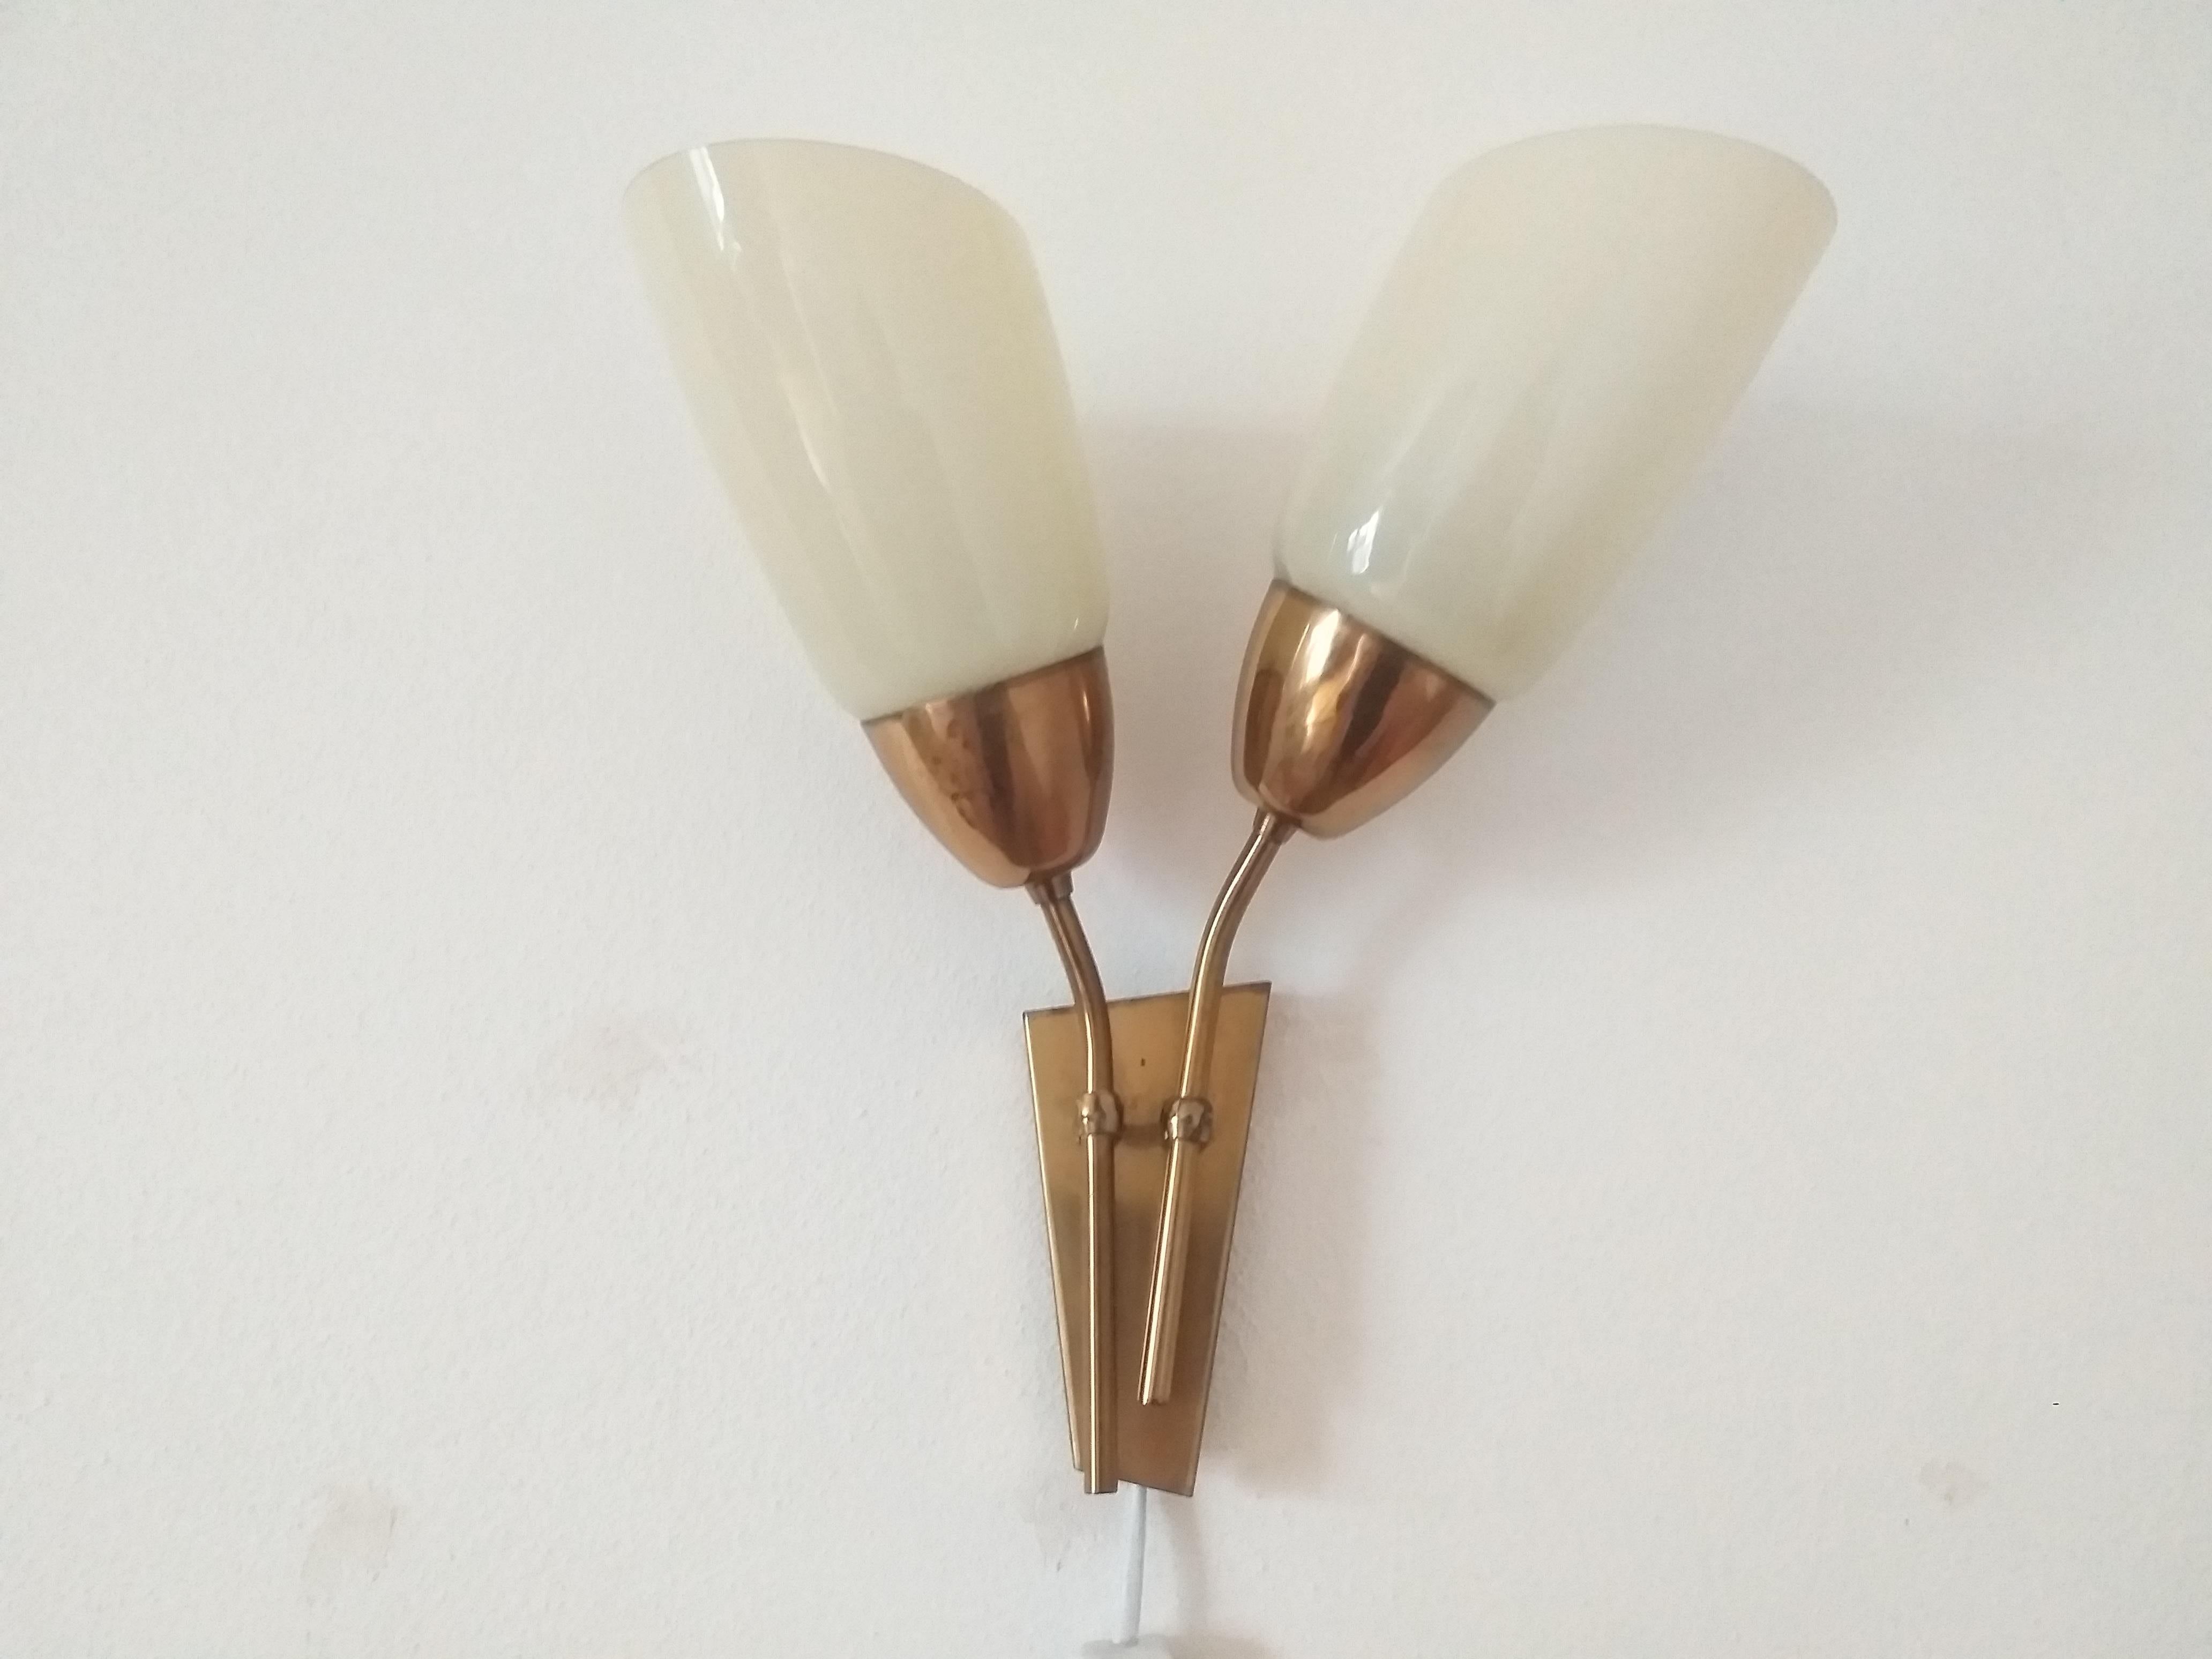 Pair of Midcentury Wall Lamps Kamenicky Senov, 1970s In Good Condition For Sale In Praha, CZ